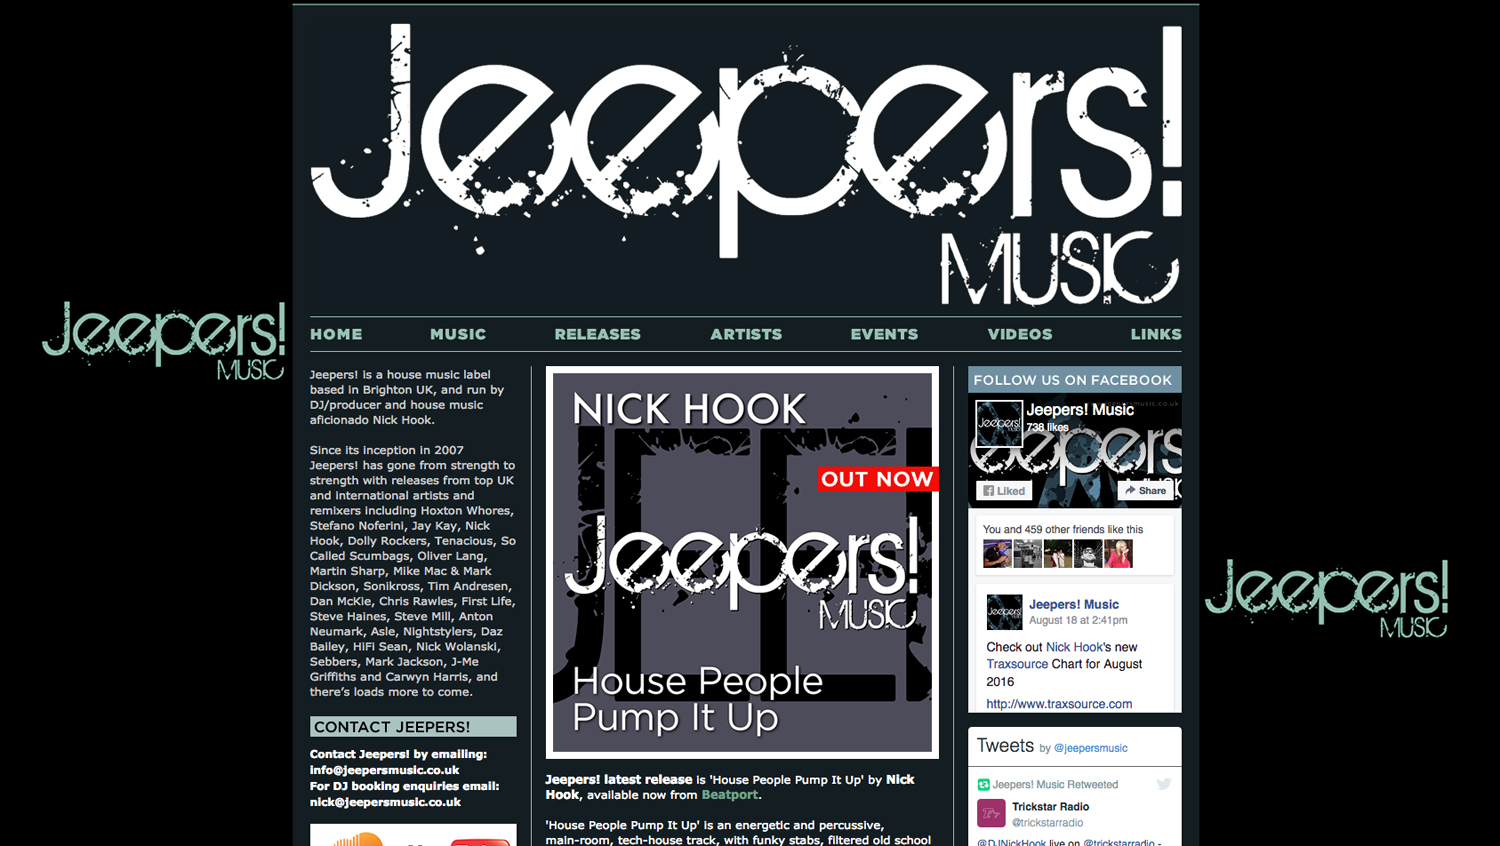 Jeepers! Music label website designed by Hook Web & Print